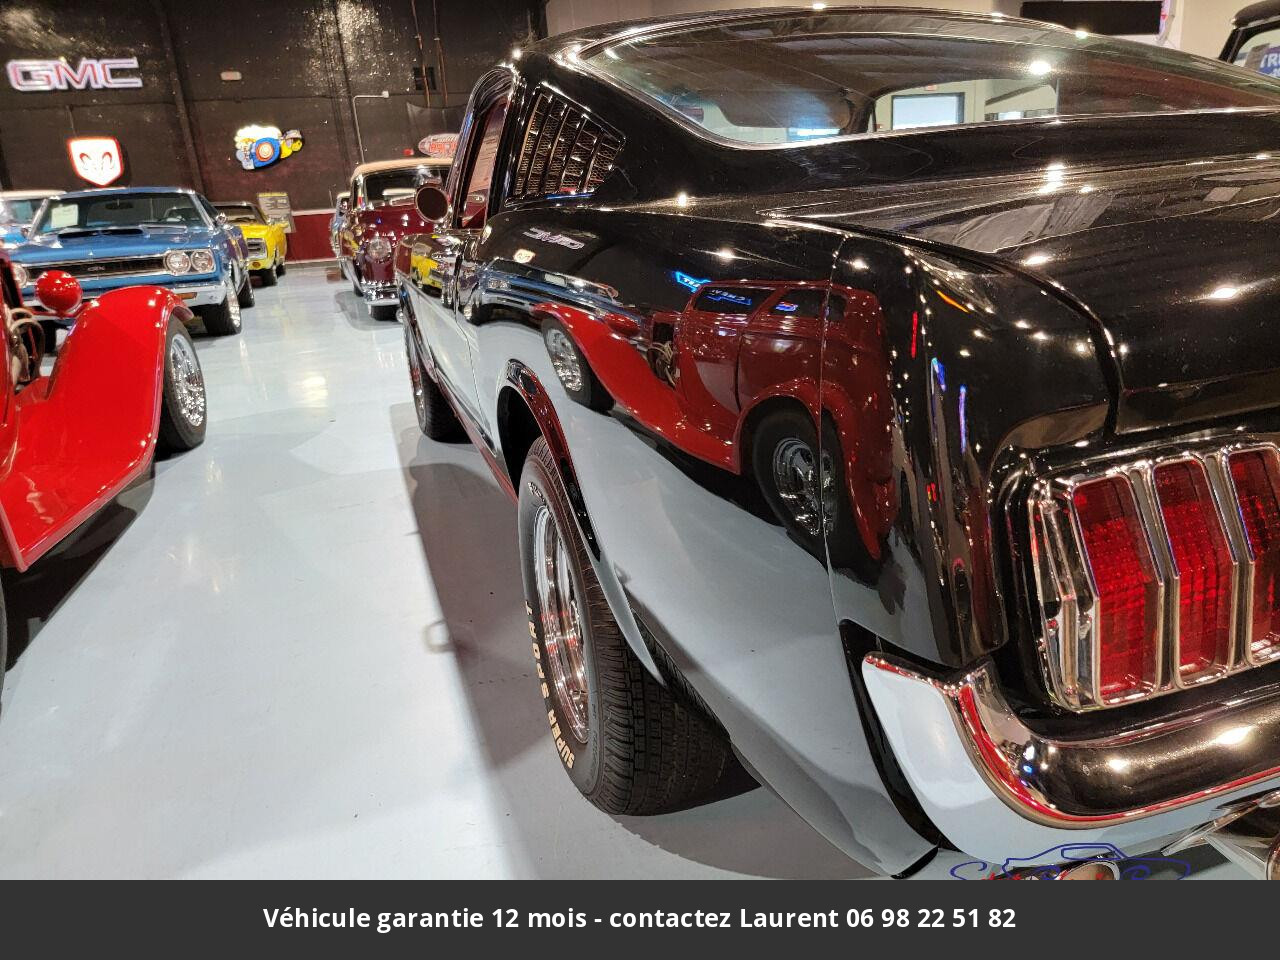 Ford Mustang V8 1965 code a prix tout compris